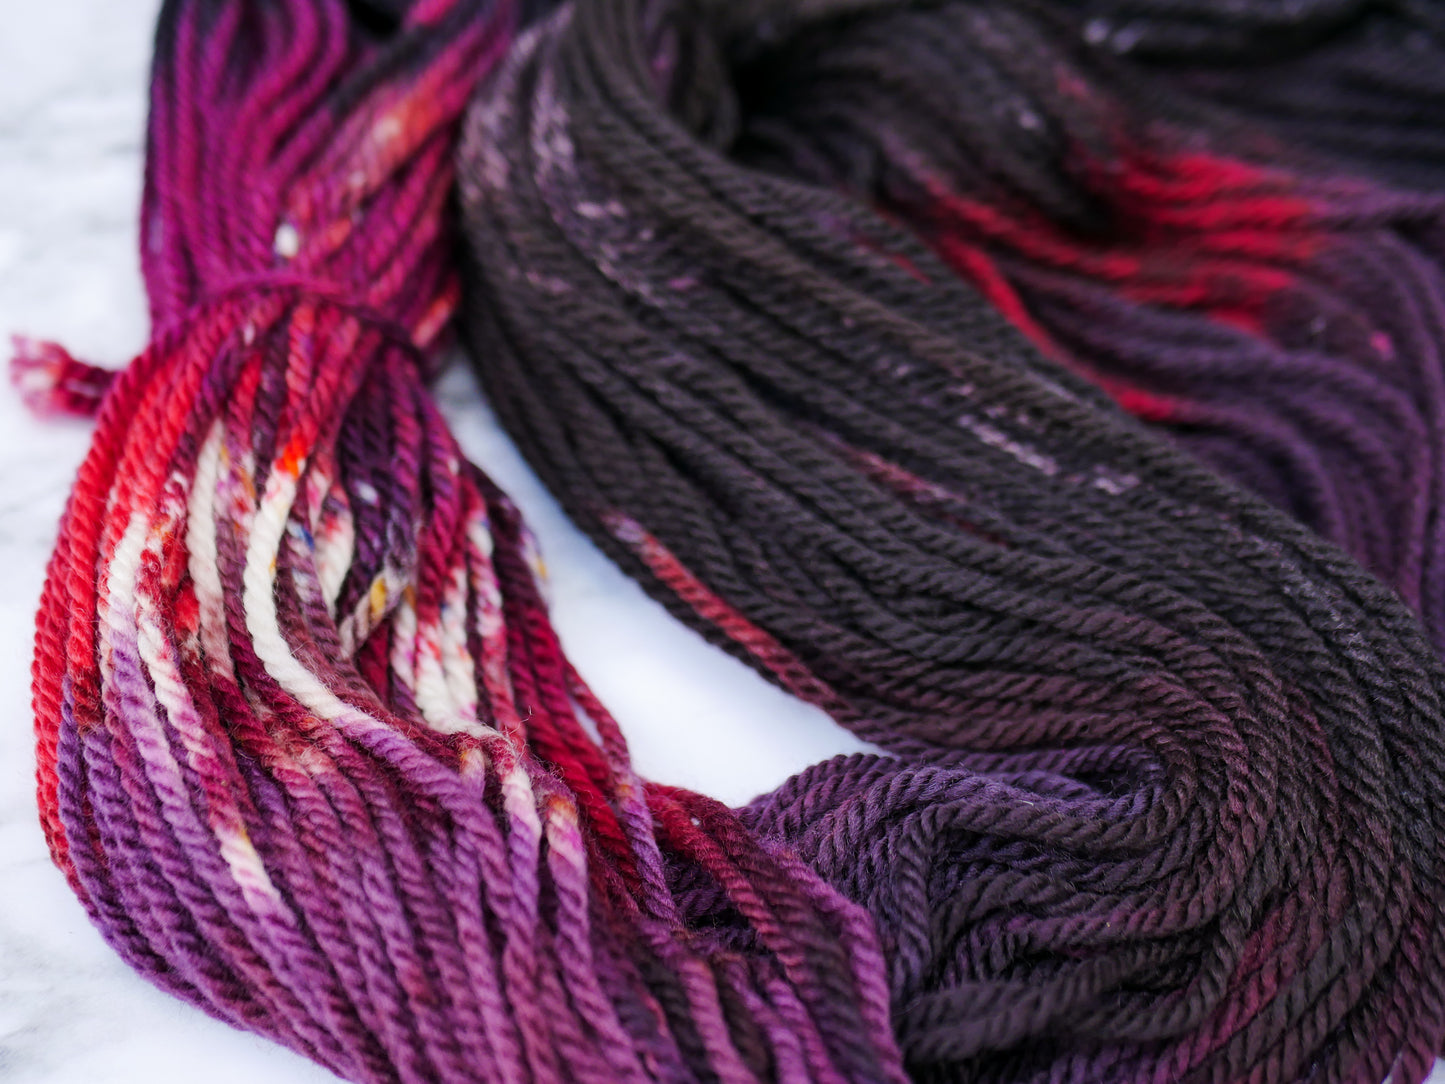 Handpainted 3 ply Worsted Weight Superwash Merino yarn - Dead, but Delicious